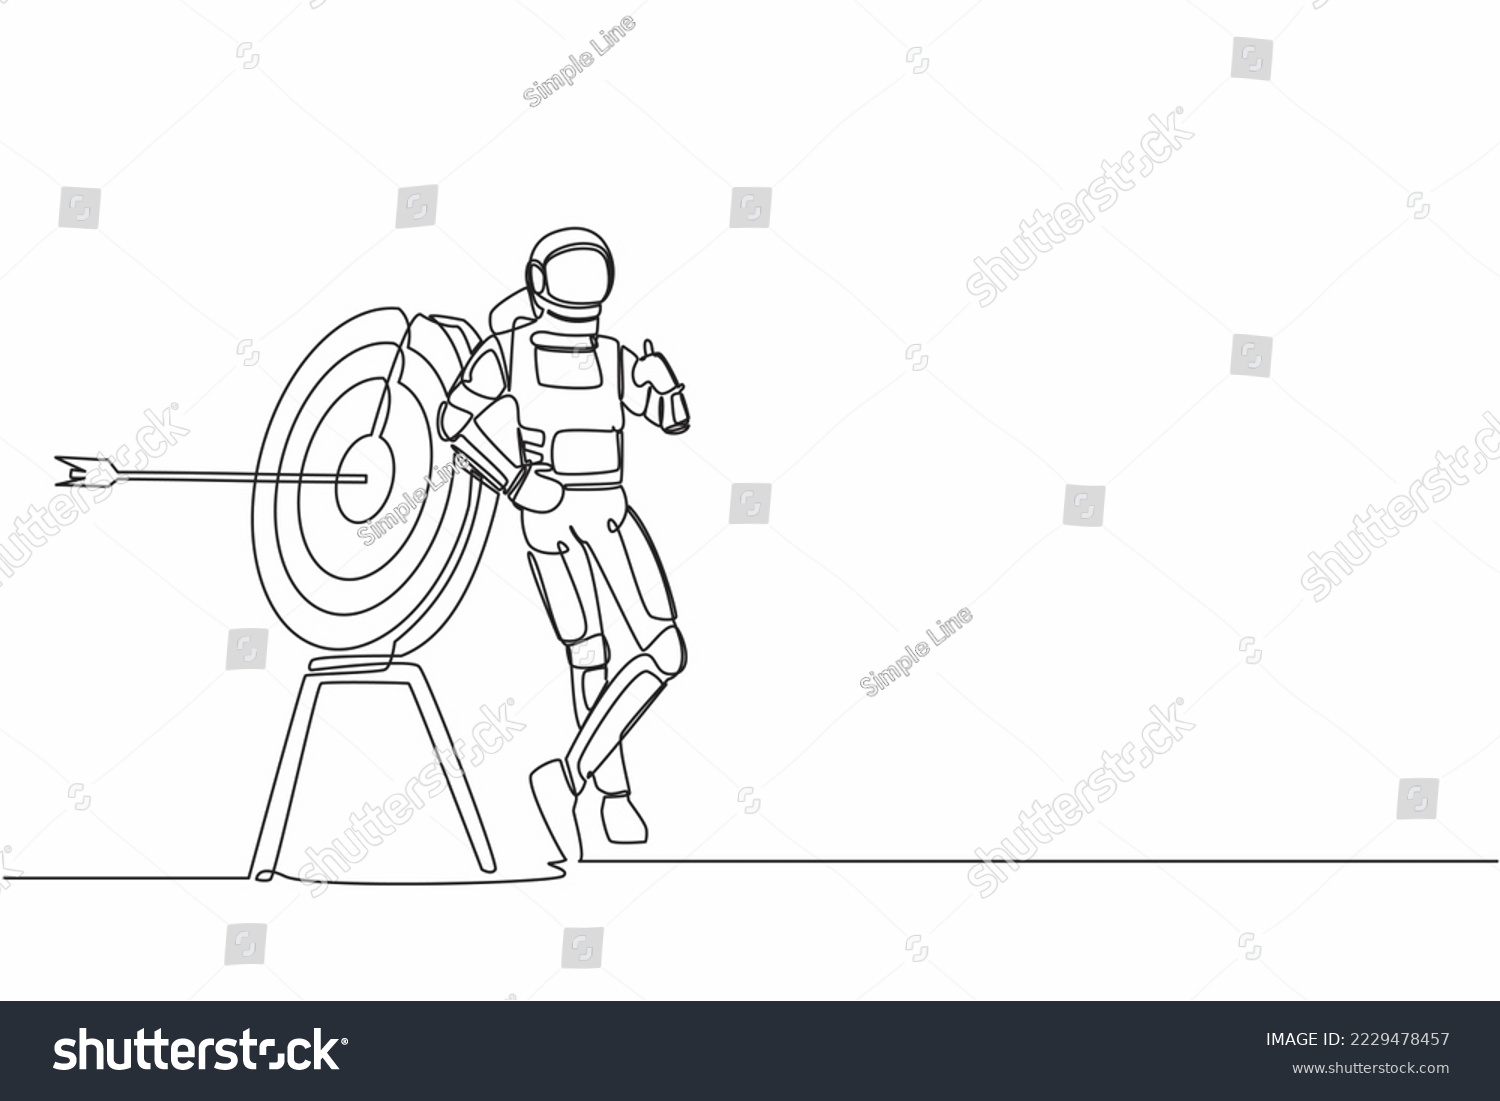 SVG of Continuous one line drawing astronaut leaning on target with thumbs up gesture. Happy with successful starship journey expedition. Cosmonaut outer space. Single line graphic design vector illustration svg